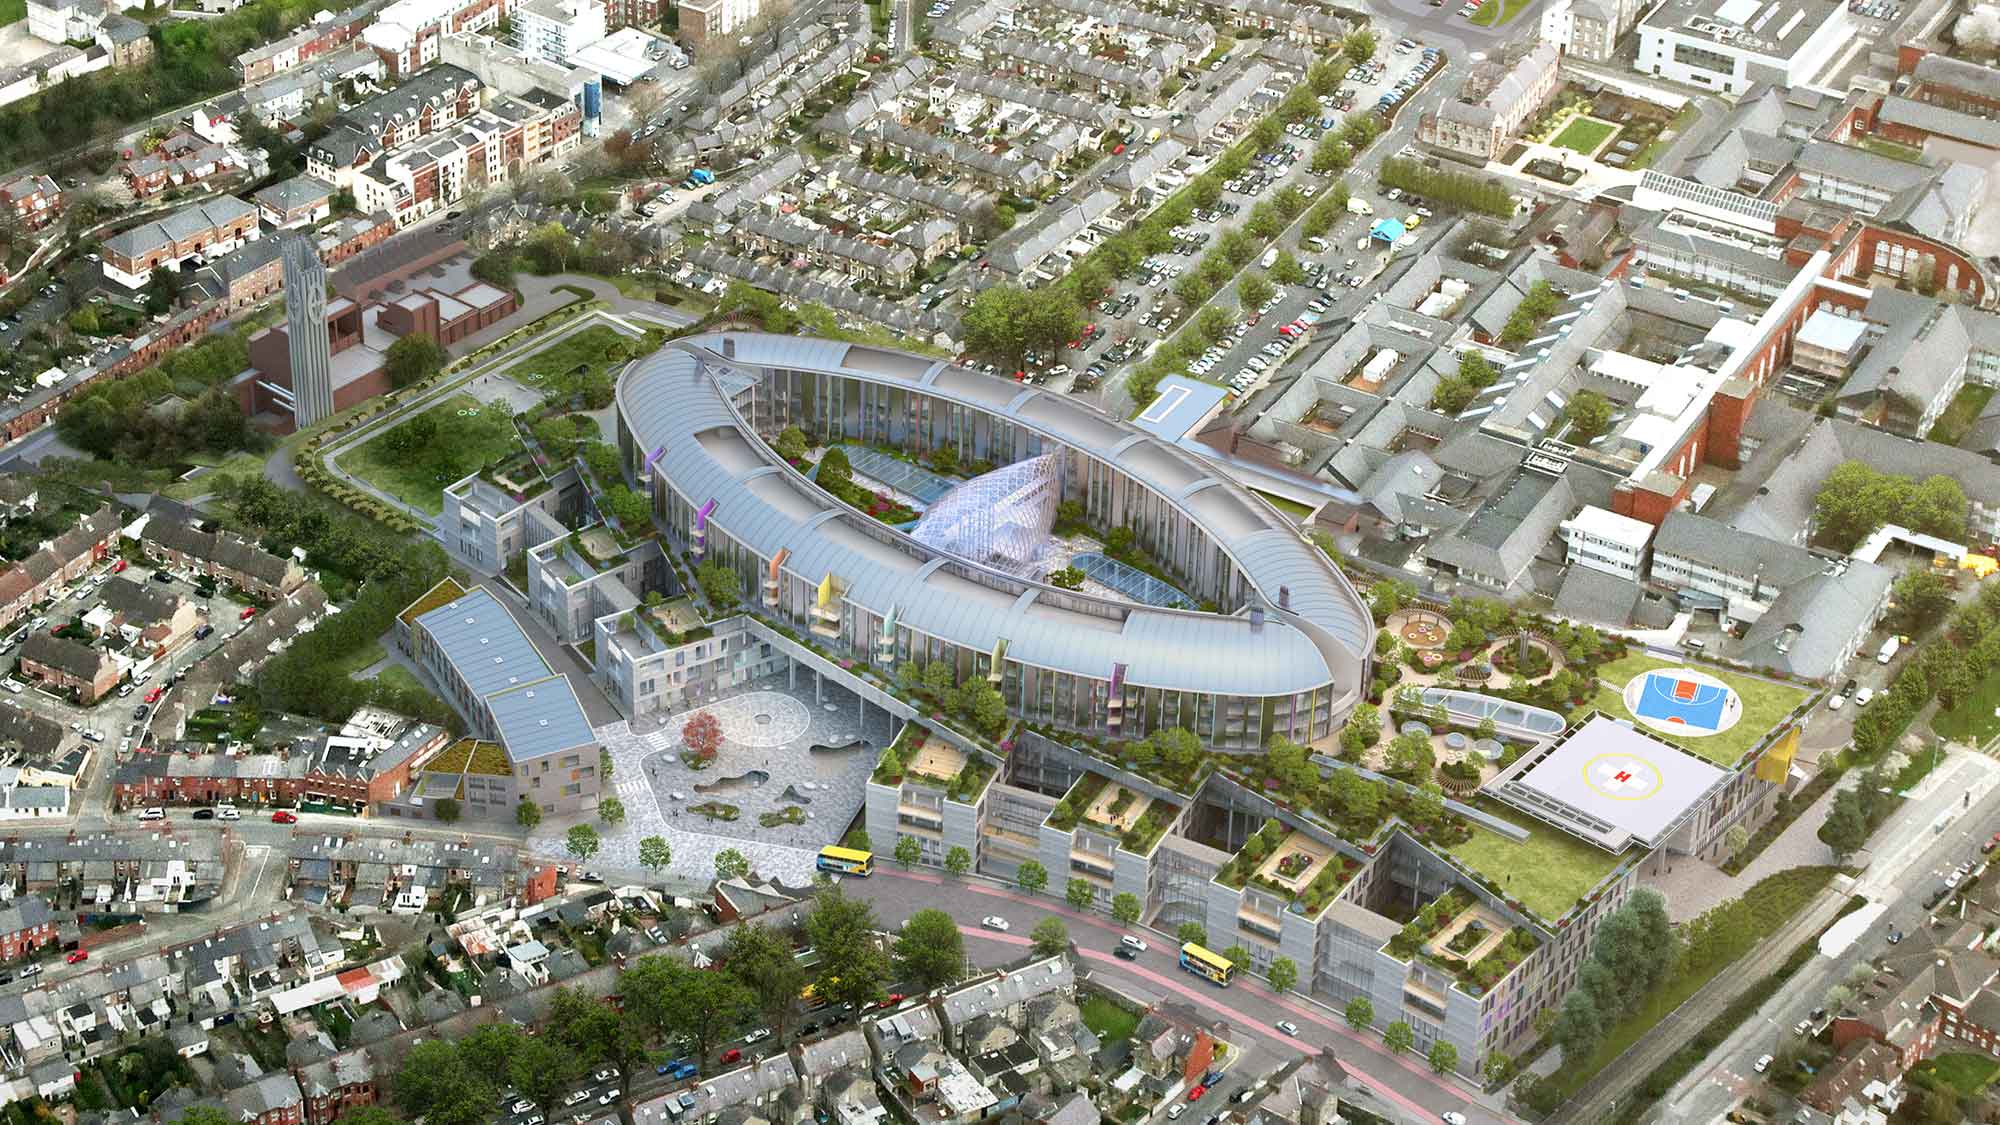 Photomontage of an aerial view of the new children's hospital on the St. James's Hospital Campus, showing the surrounding suburbs.